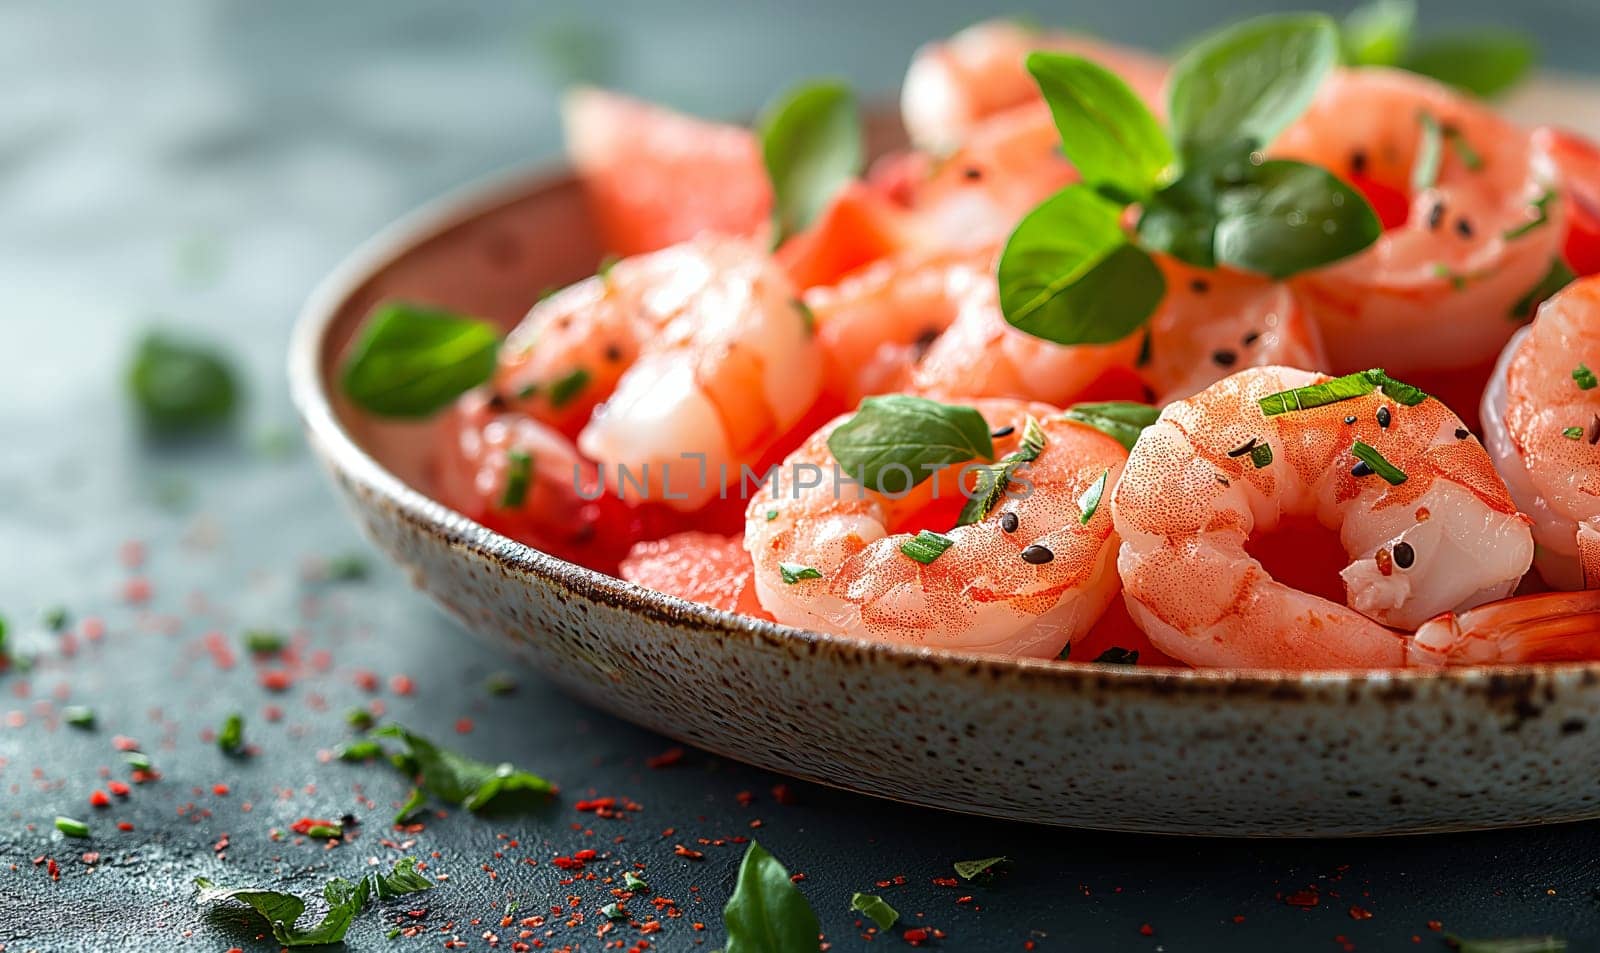 Delicious sauteed spicy shrimp with lime and basilik. Selrctive soft focus.